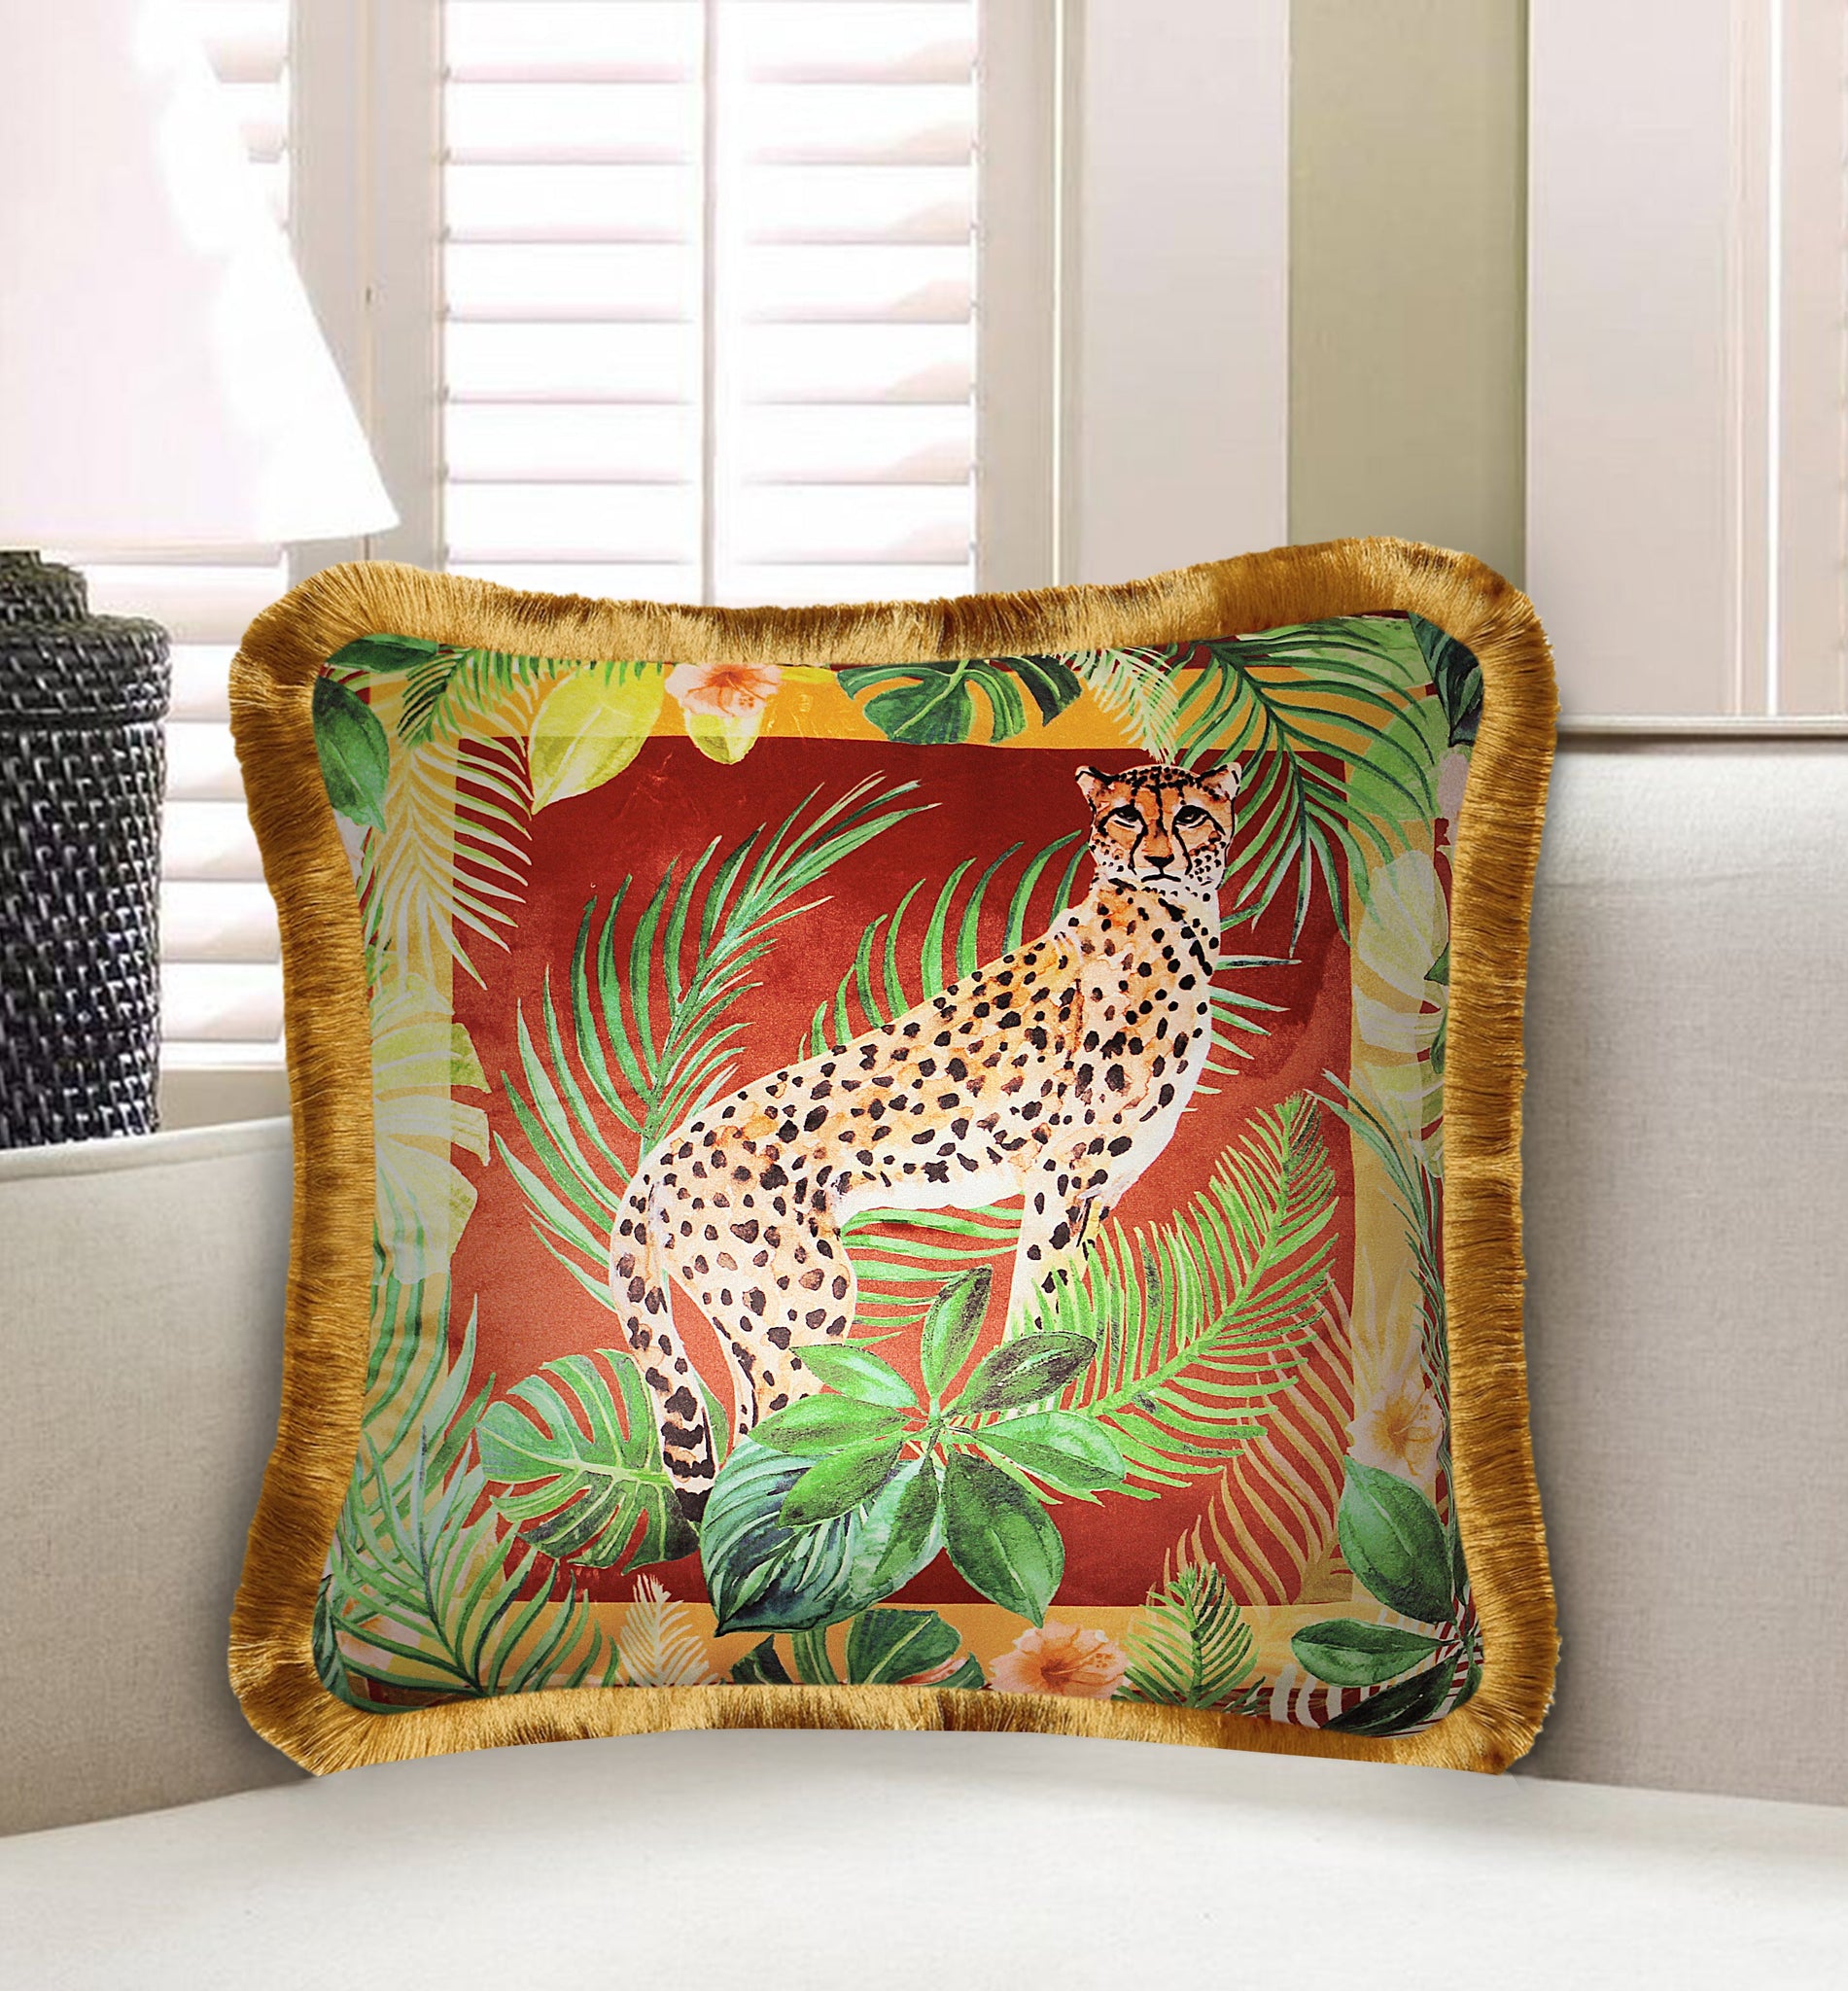  Velvet Cushion Cover Leopard and Jungle Decorative pillowcase Wild Animal Décor Throw Pillow for Sofa Chair Bedroom Living Room Multi Color 45x45cm (18x18 Inches)